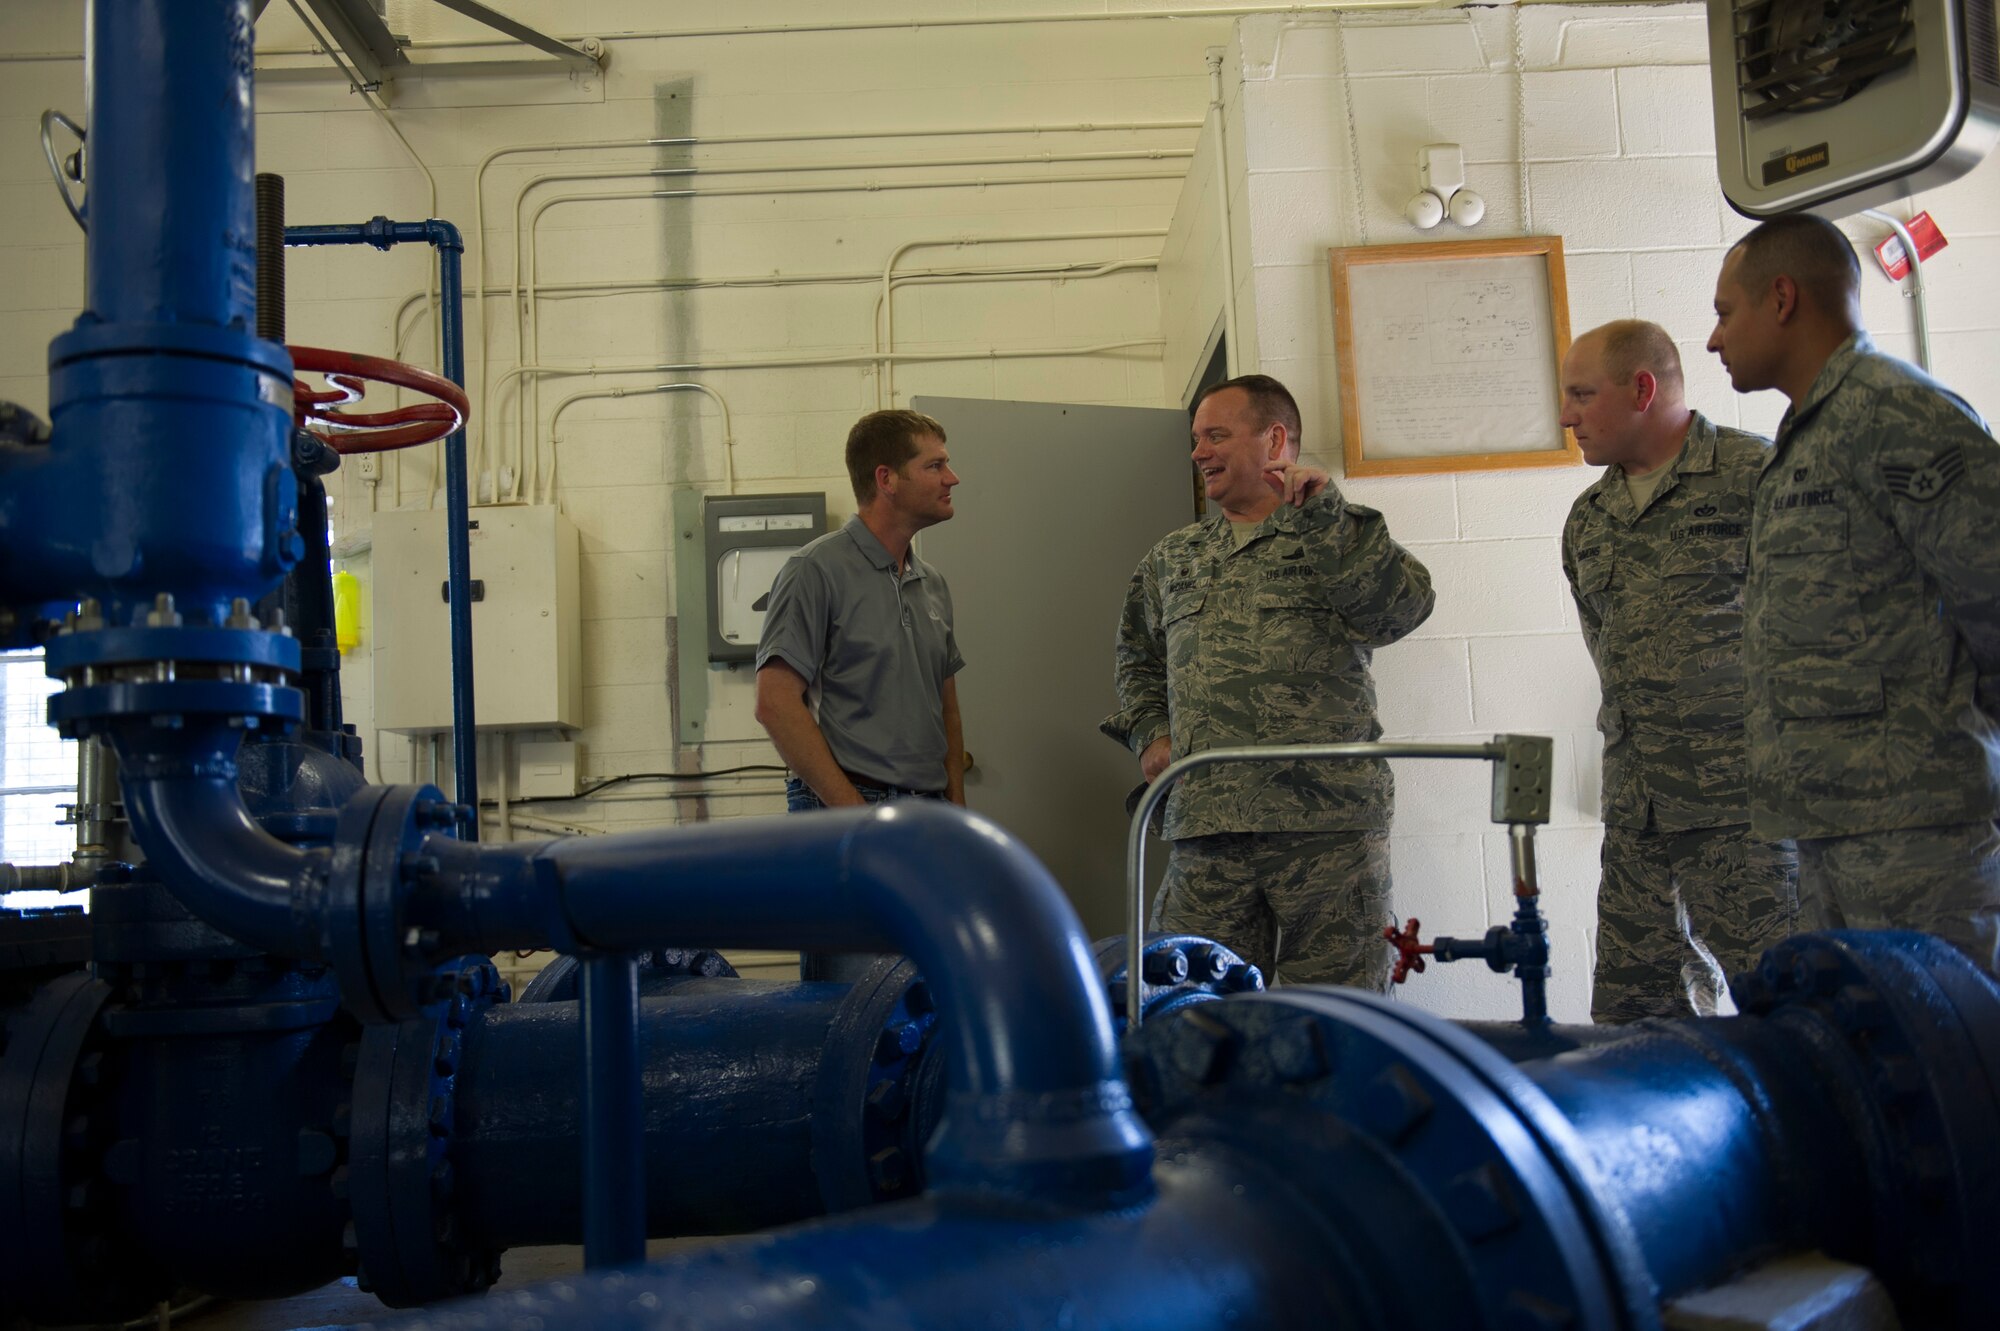 Personnel from the 92nd Civil Engineer Squadron brief Col. Brian McDaniel (center), 92nd Air Refueling Wing commander, about Fairchild’s water reservoir system. The system supplies water to all base personnel to include the military members and base housing facilities. (U.S. Air Force photo/Airman 1st Class Nick J. Daniello)